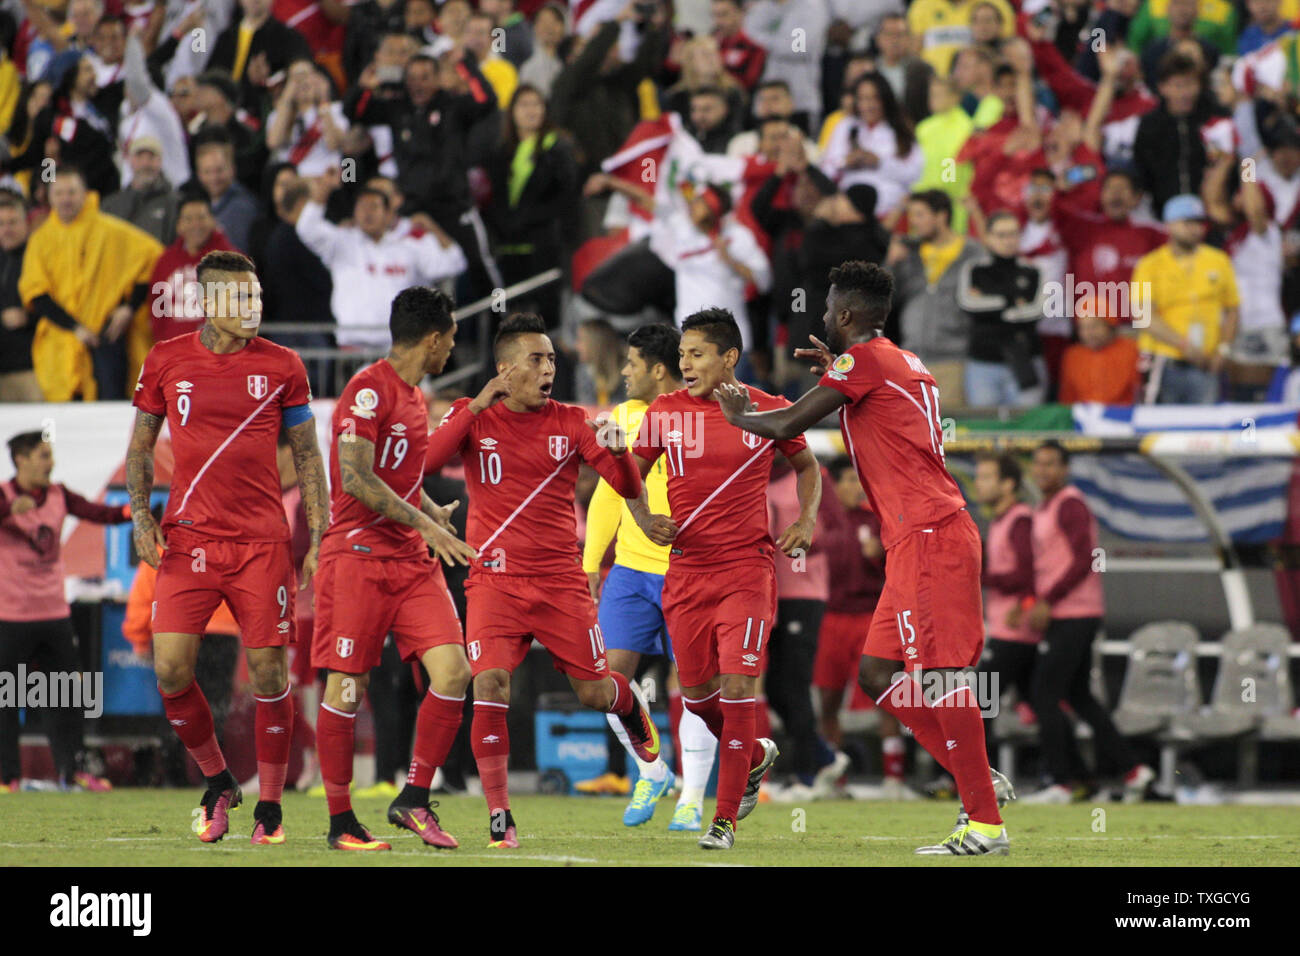 Peru players celebrate after they scored against Brazil in the second half of the 2016 Copa America Centenario Group B match at Gillette Stadium in Foxborough, Massachusetts on June 12, 2016. Peru defeated Brazil 1-0.  Photo by Matthew Healey/UPI Stock Photo